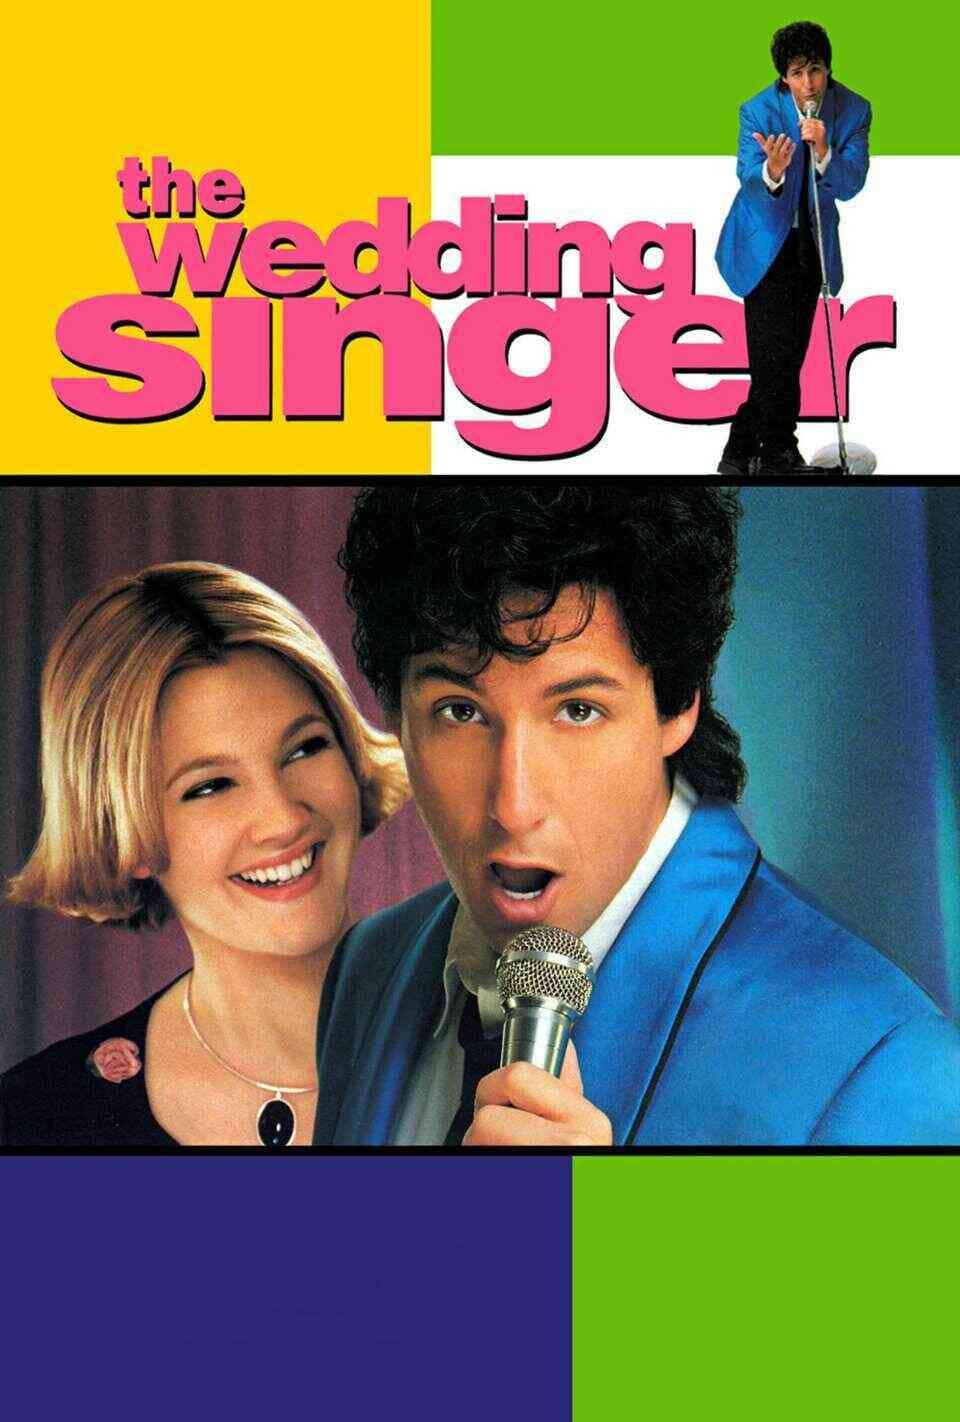 Read The Wedding Singer screenplay (poster)